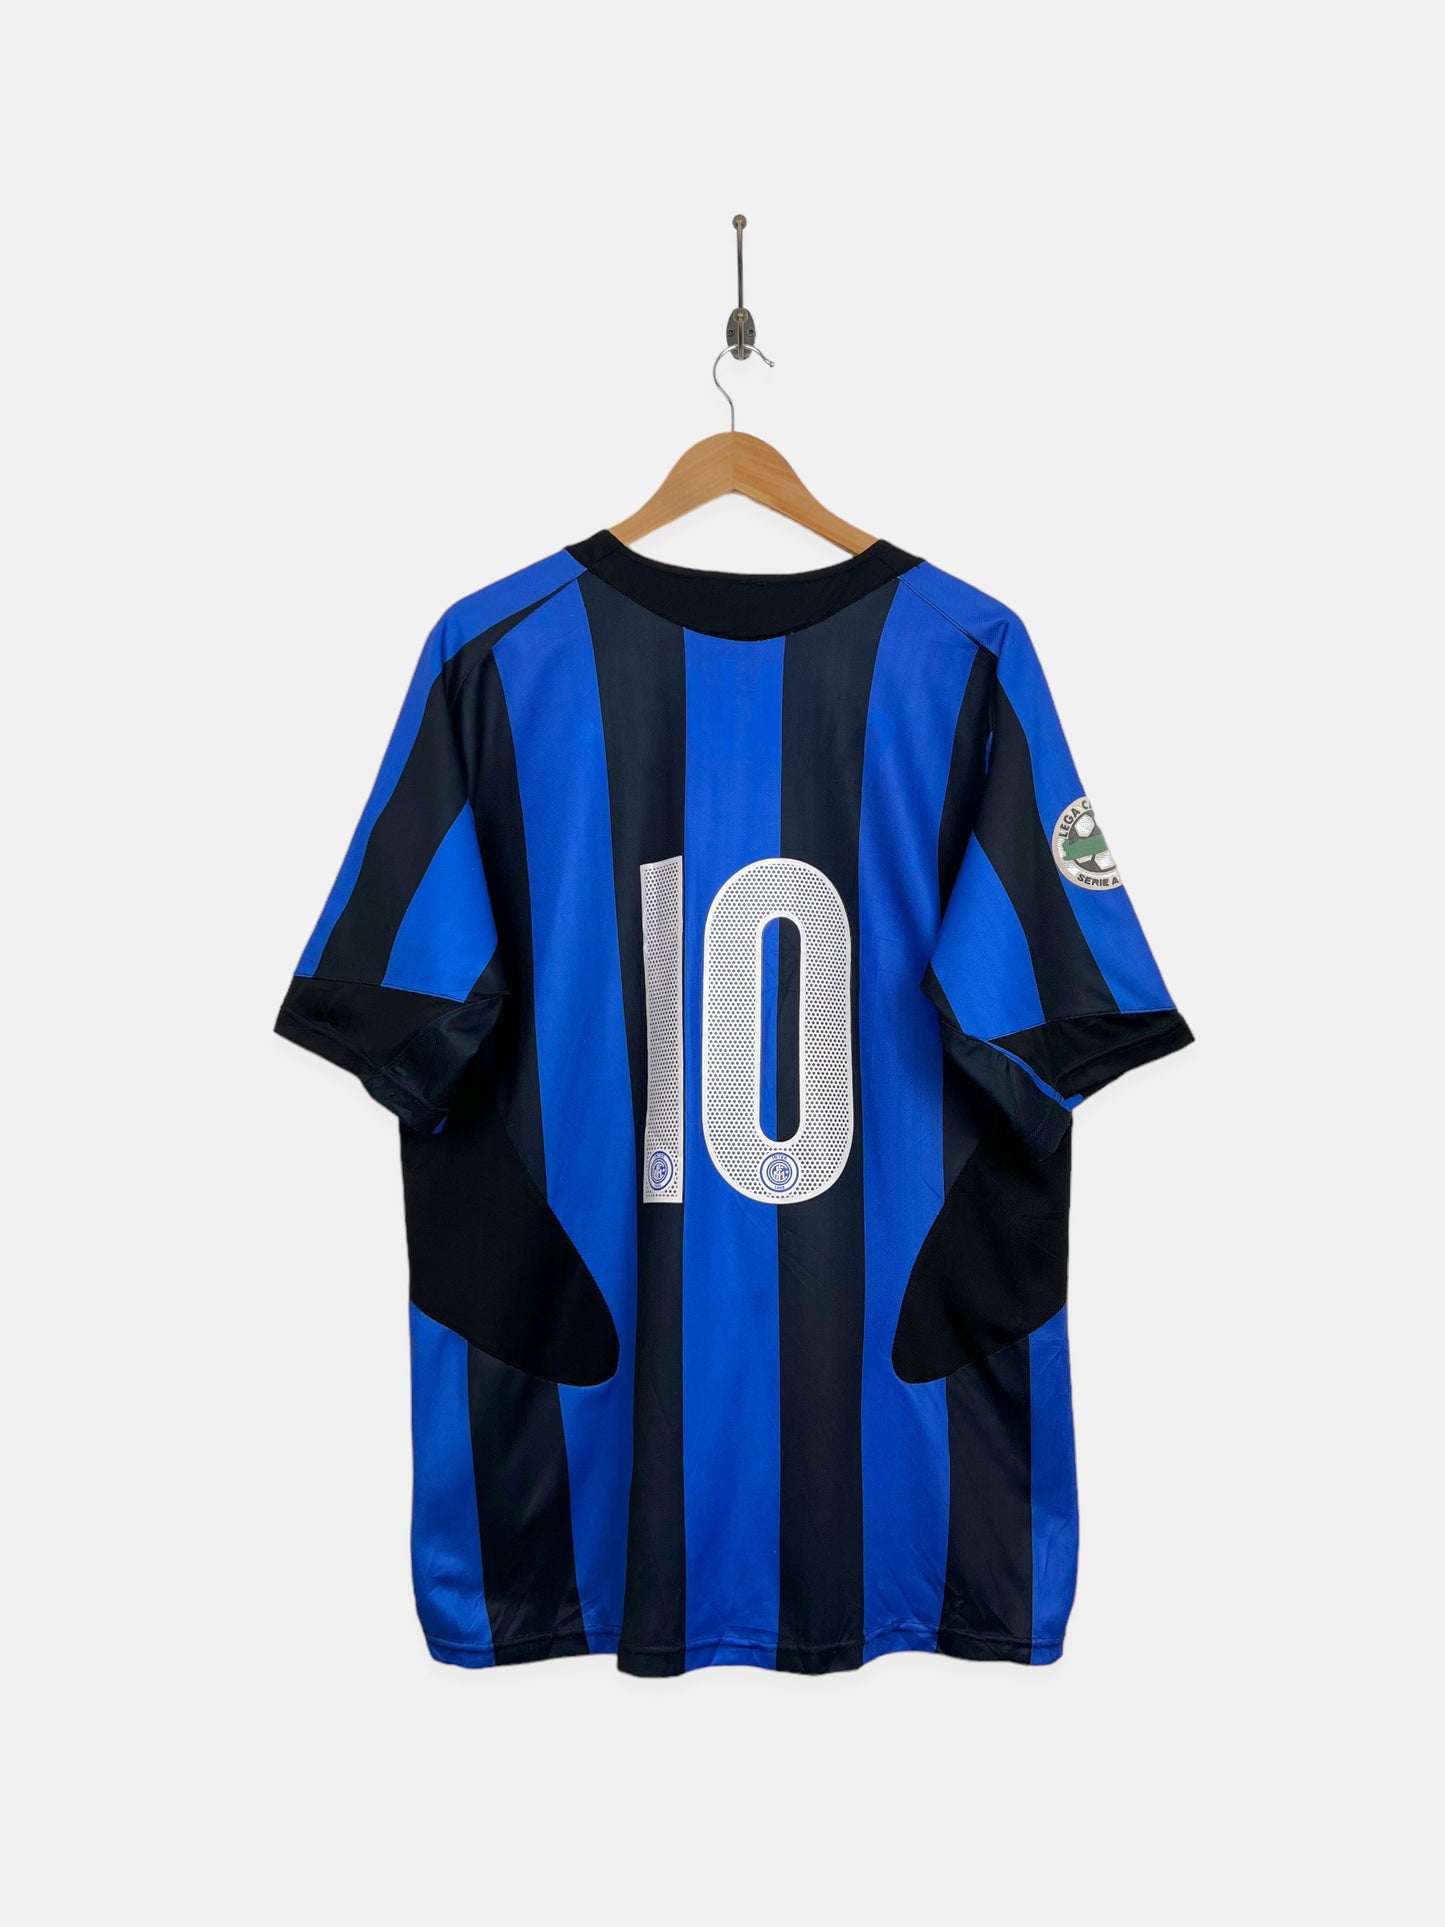 Inter Milan 05/06 Nike Embroidered Vintage Football Jersey Size XL